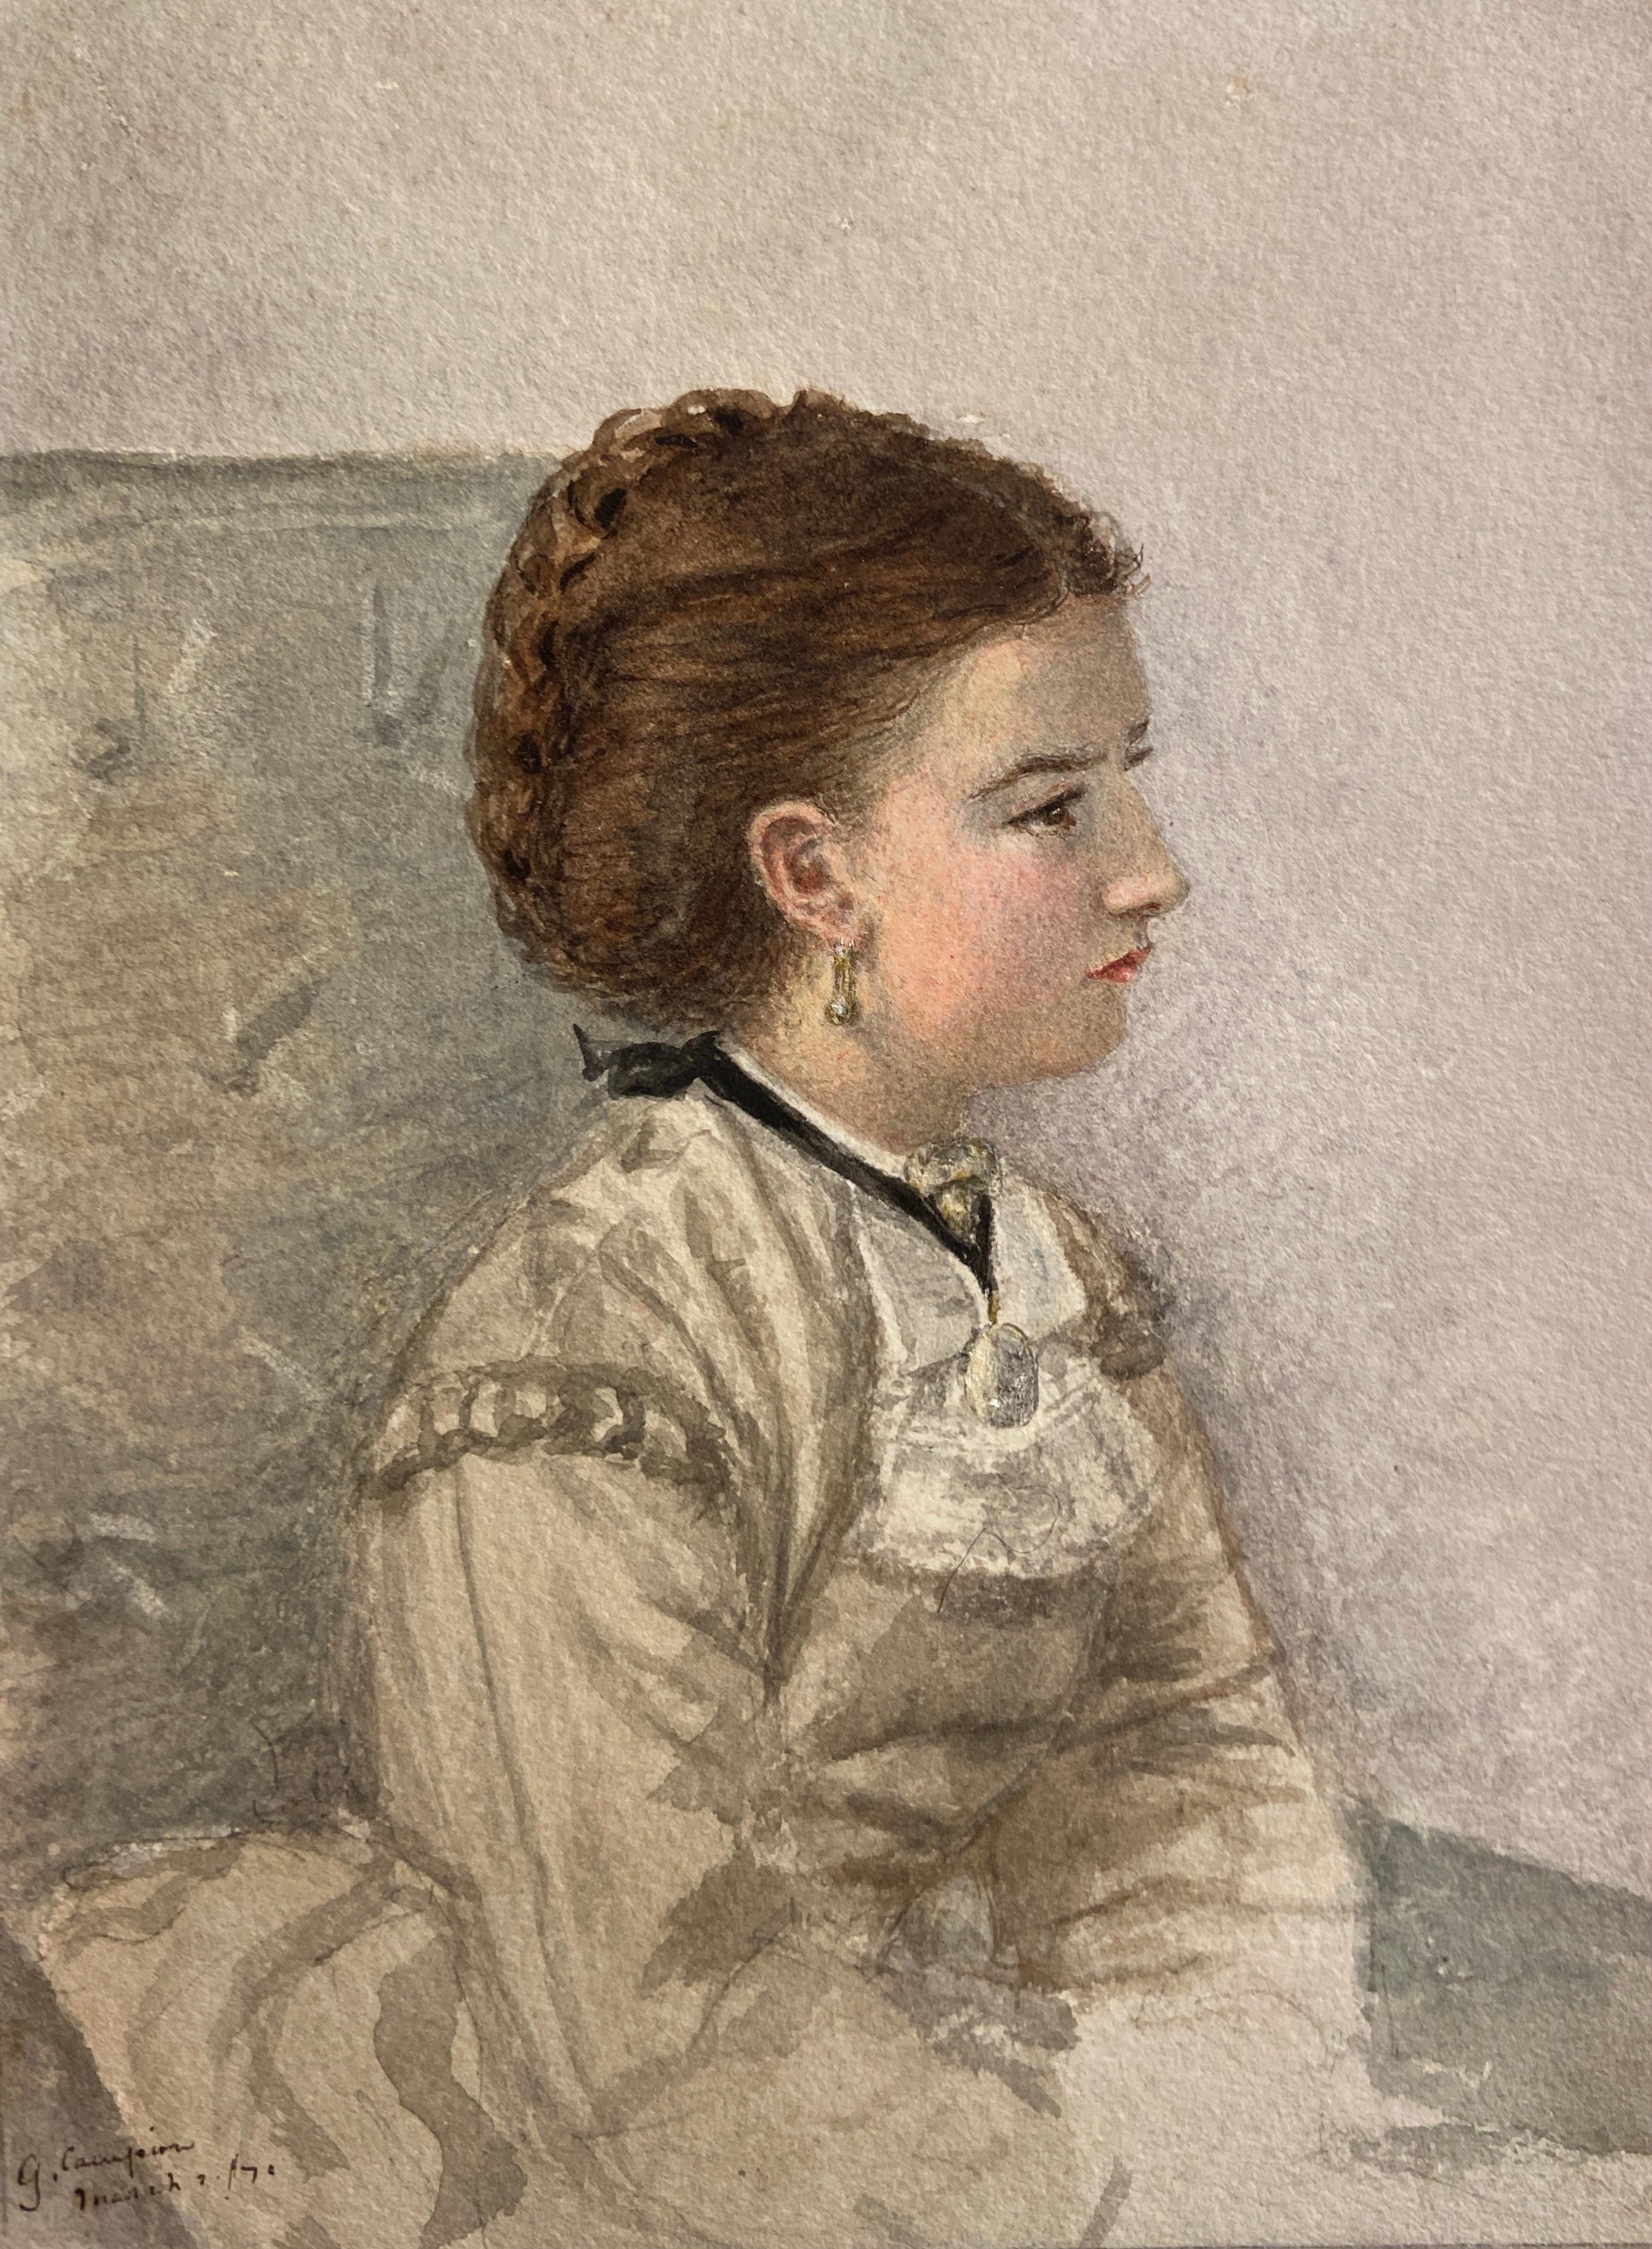 Gertrude Braud Portrait - Sketch from Life, 19th Century English Watercolour, Girl in Profile